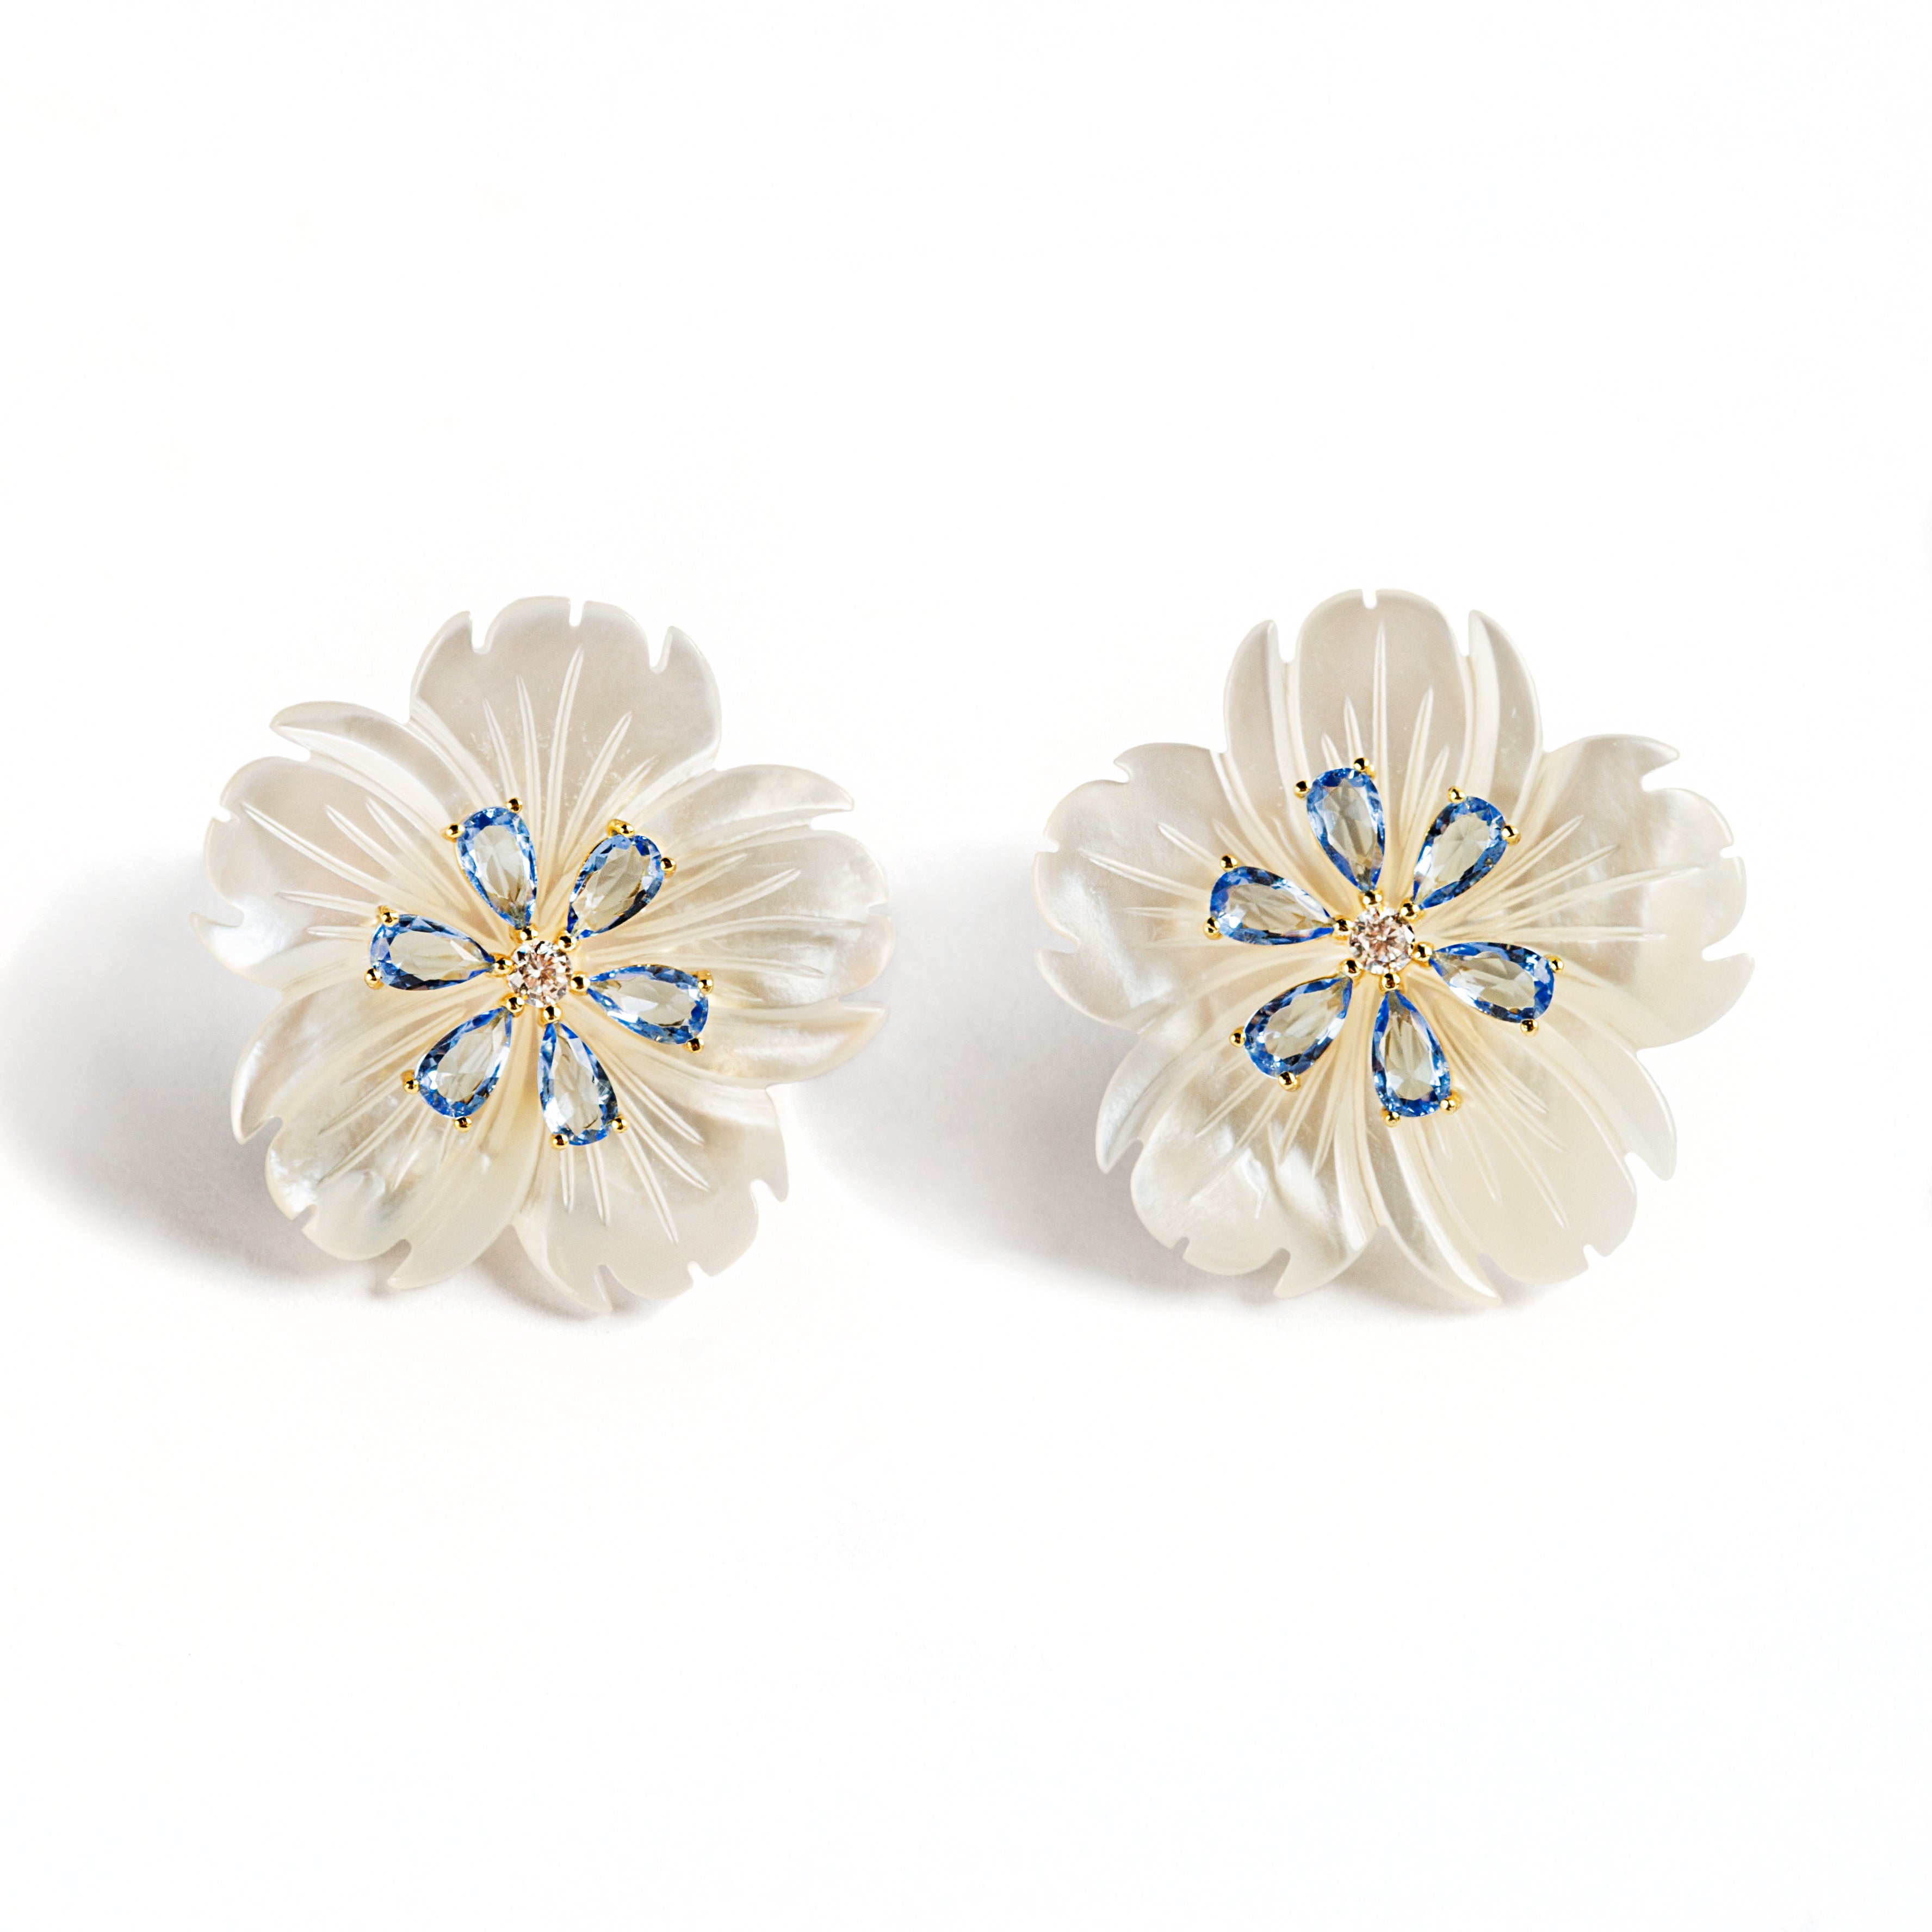 925 GOLD PLATED FLOWER EARRINGS WITH MOTHER OF PEARL AND BLUE CRYSTALS